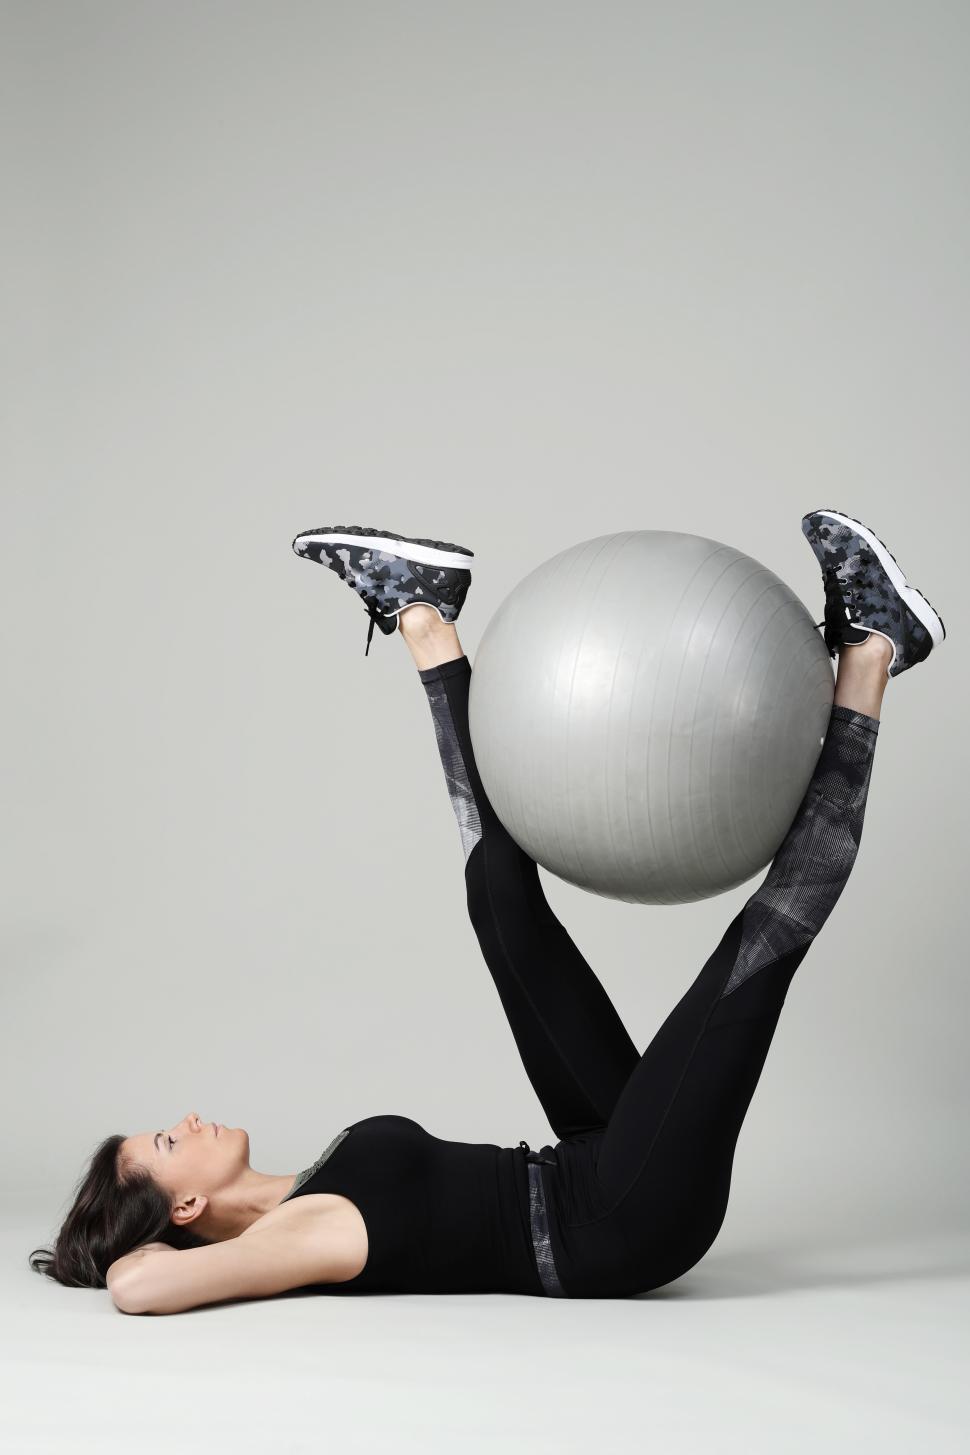 Free Image of Fitness ball exercise 